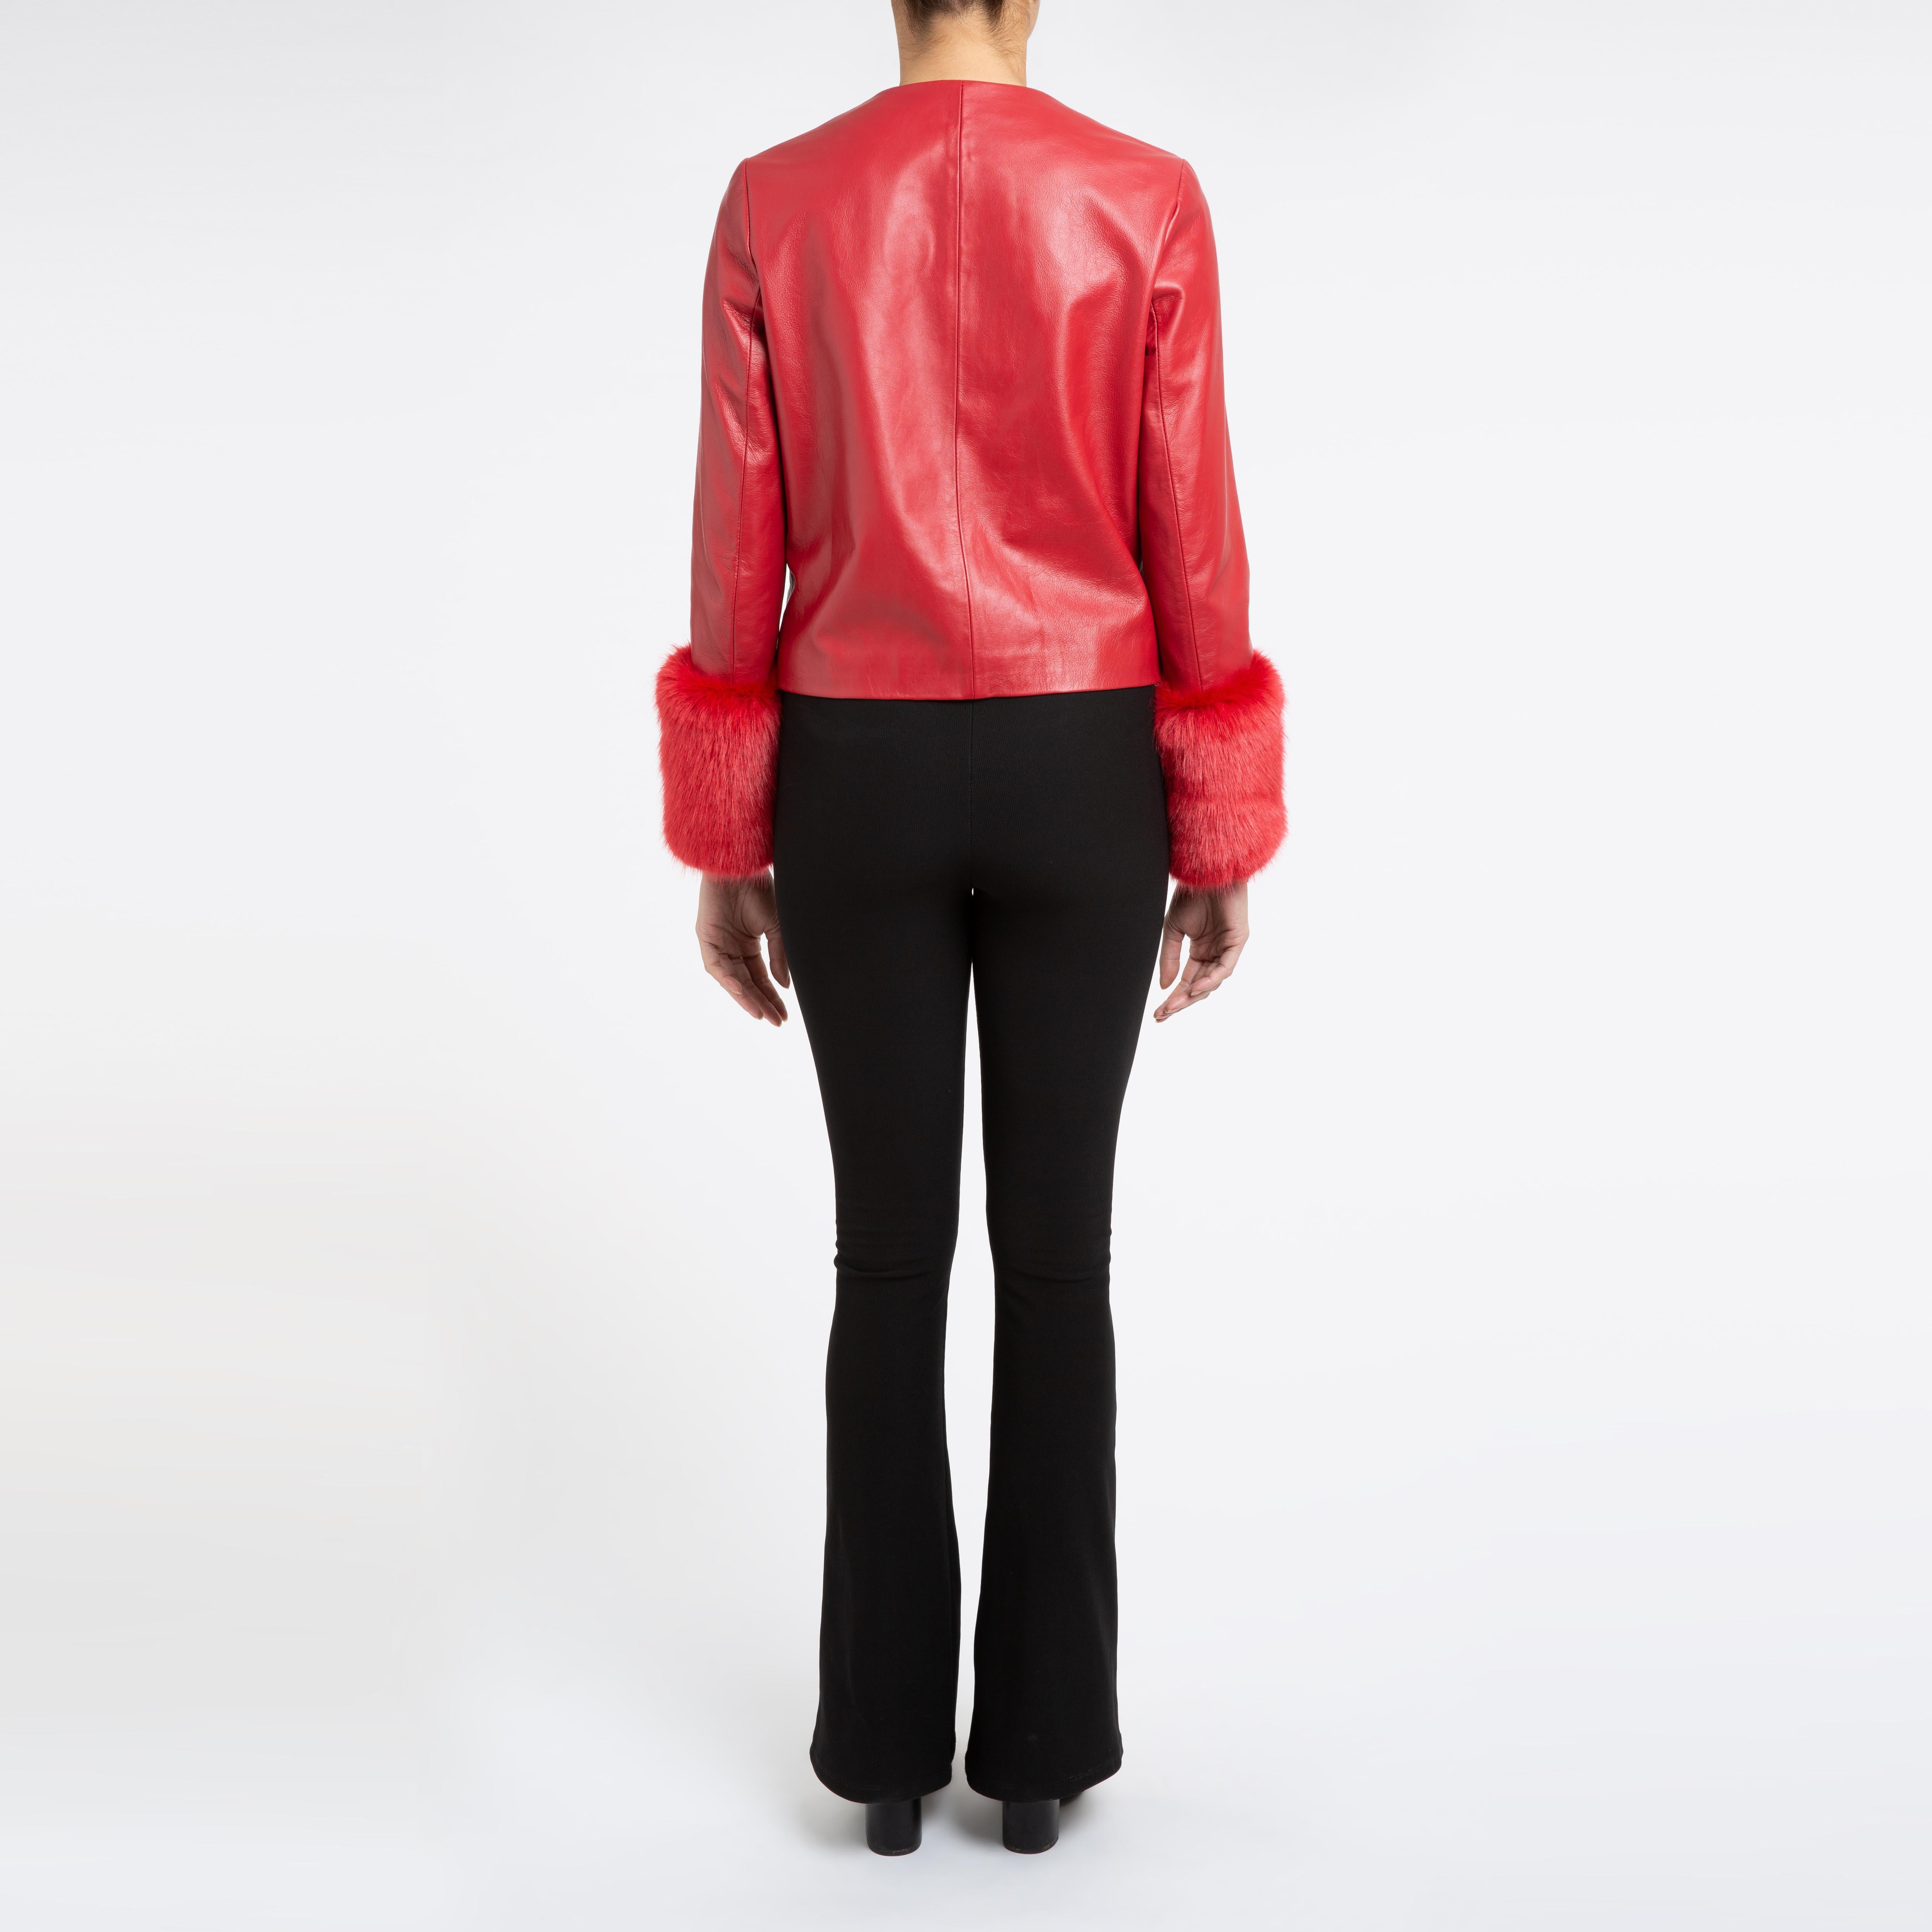 Verheyen Vita Cropped Jacket in Red Leather with Faux Fur - Size uk 10 For Sale 2